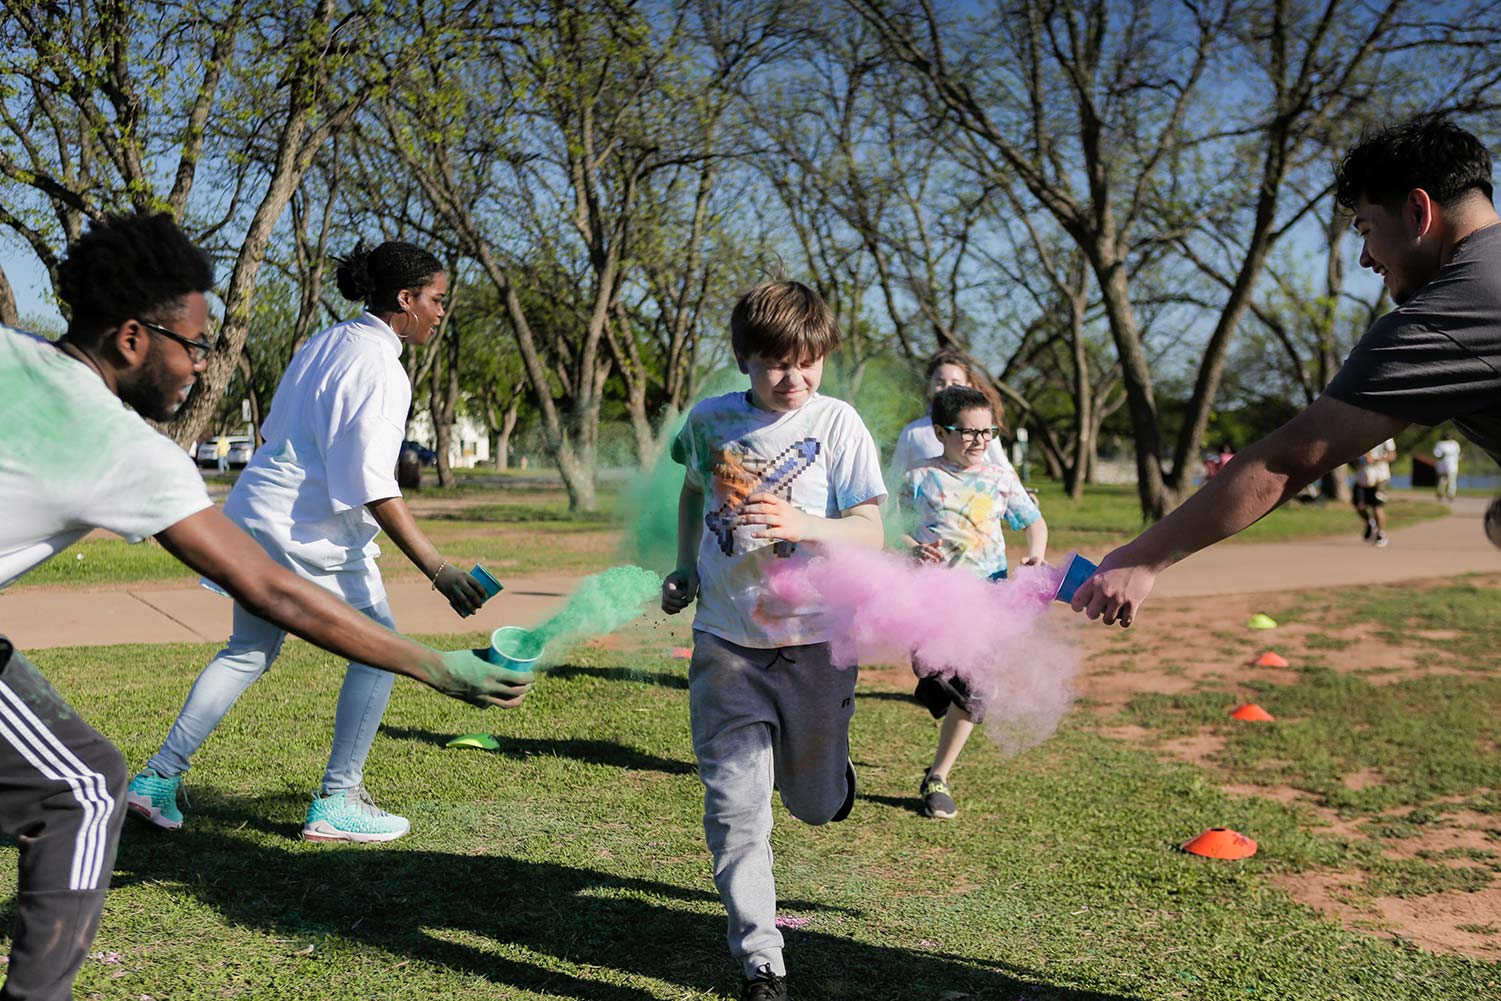 Some children prepare to be covered in dust as they pass a checkpoint, April 12. The "5Kolor Run" had open registration, which let a wide variety of runners participate.